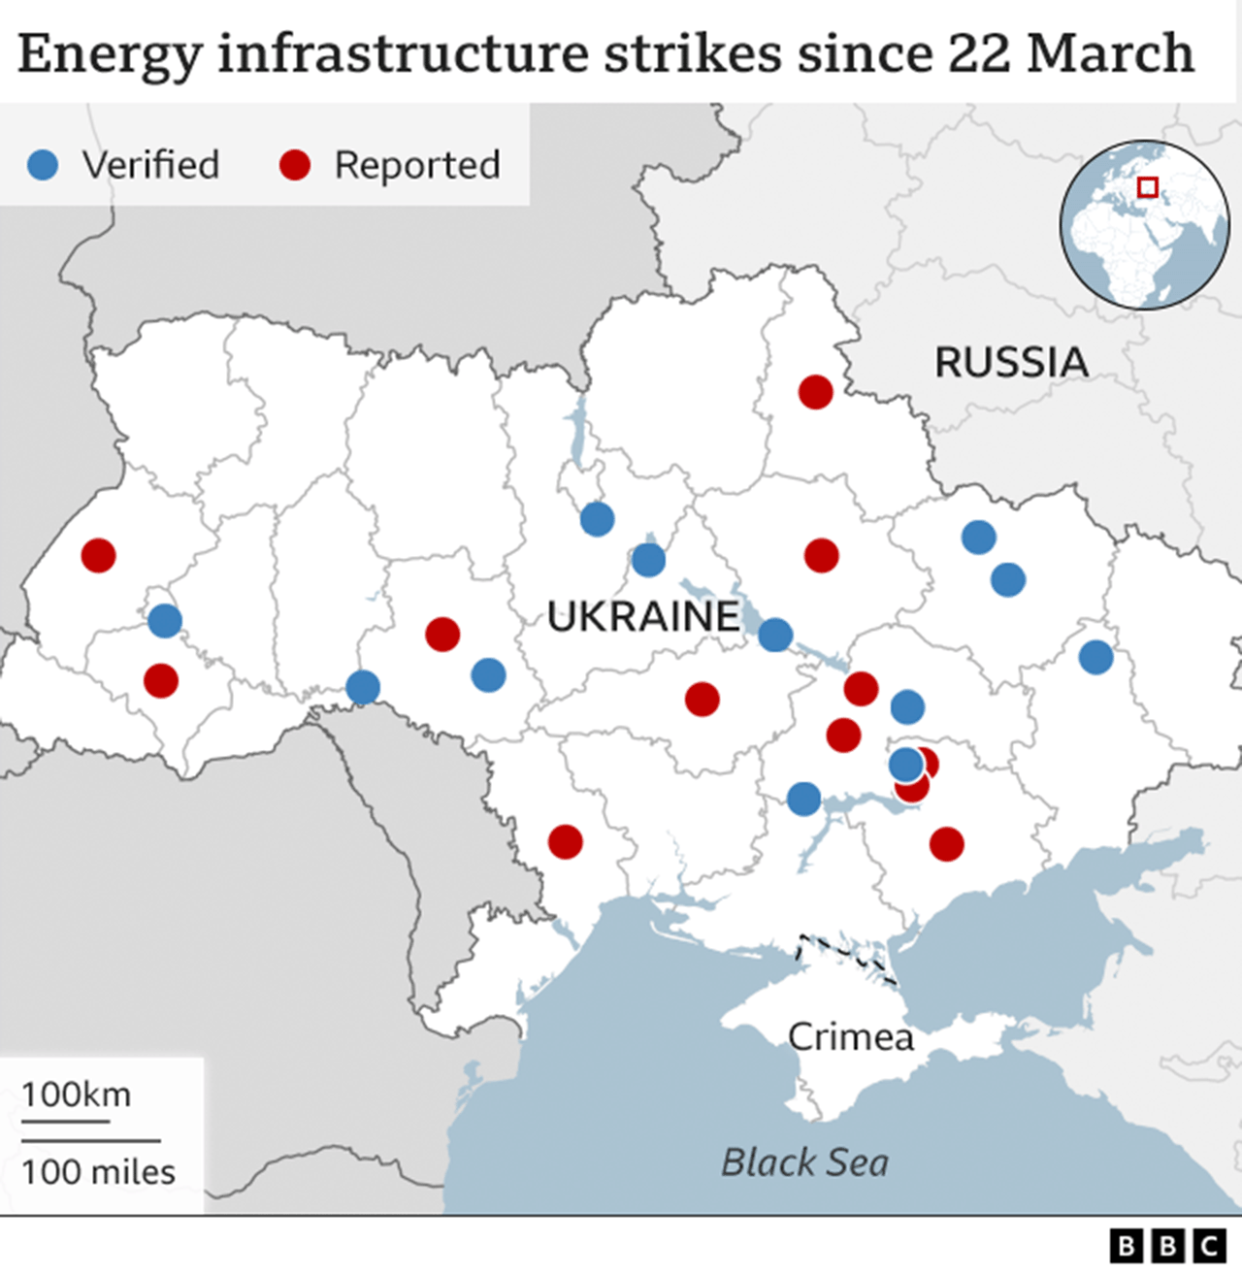 Map of Ukraine showing locations of verified or reported Russian missile and drone attacks on energy infrastructure.